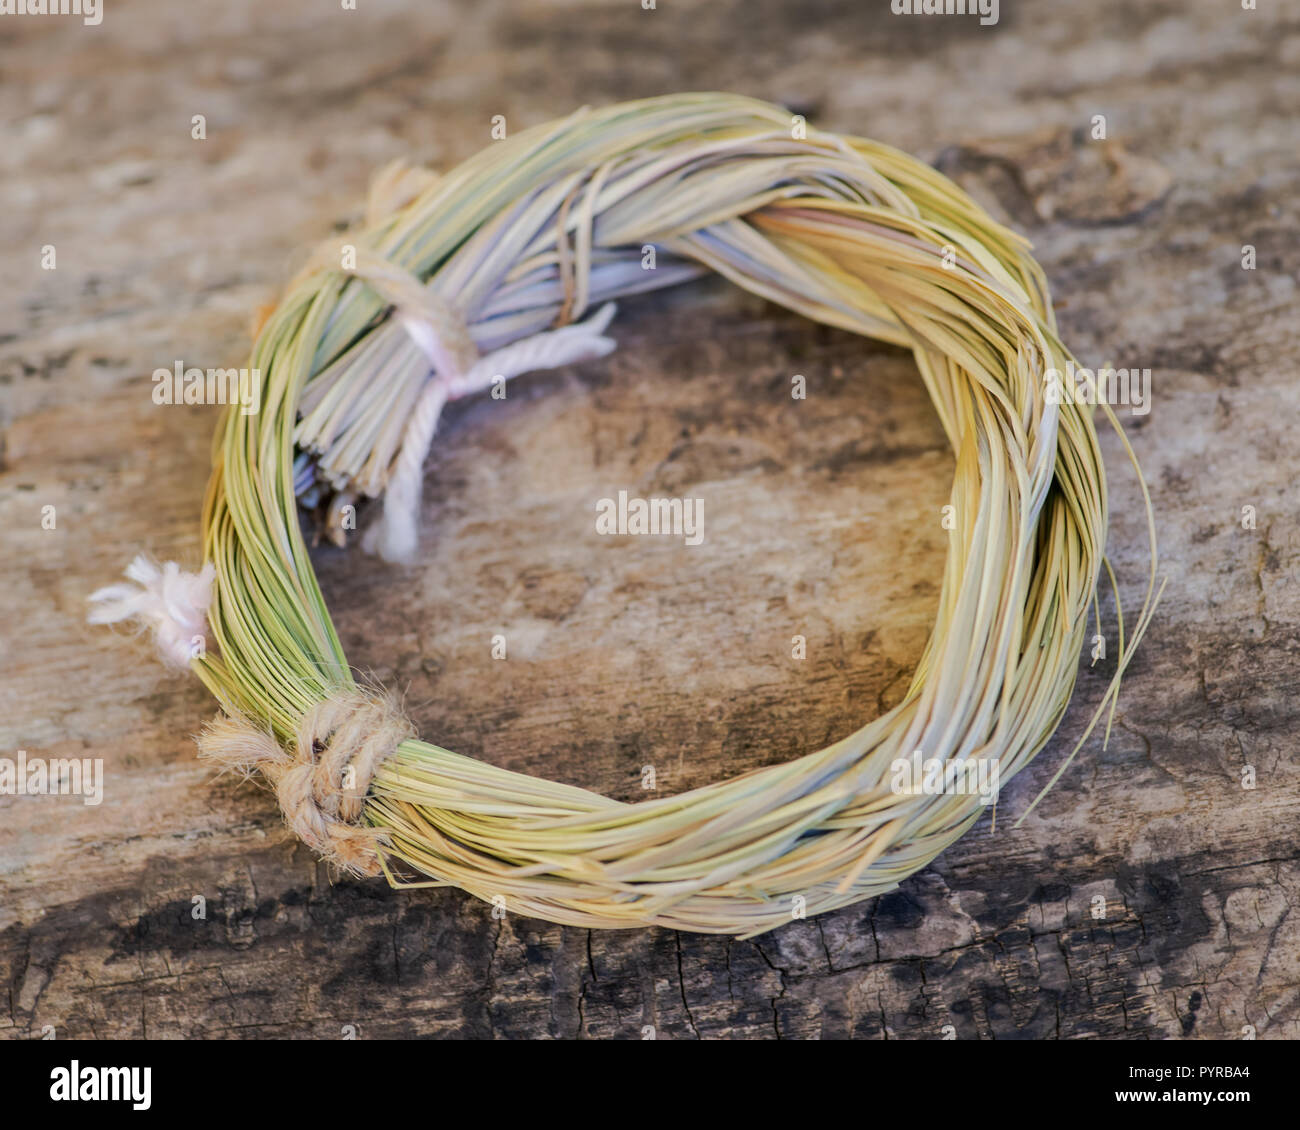 Wildcrafted dried Sweetgrass (Hierochloe odorata) wrapped in organic cotton string. On tree bark in forest preserve. Smudging ritual. Stock Photo